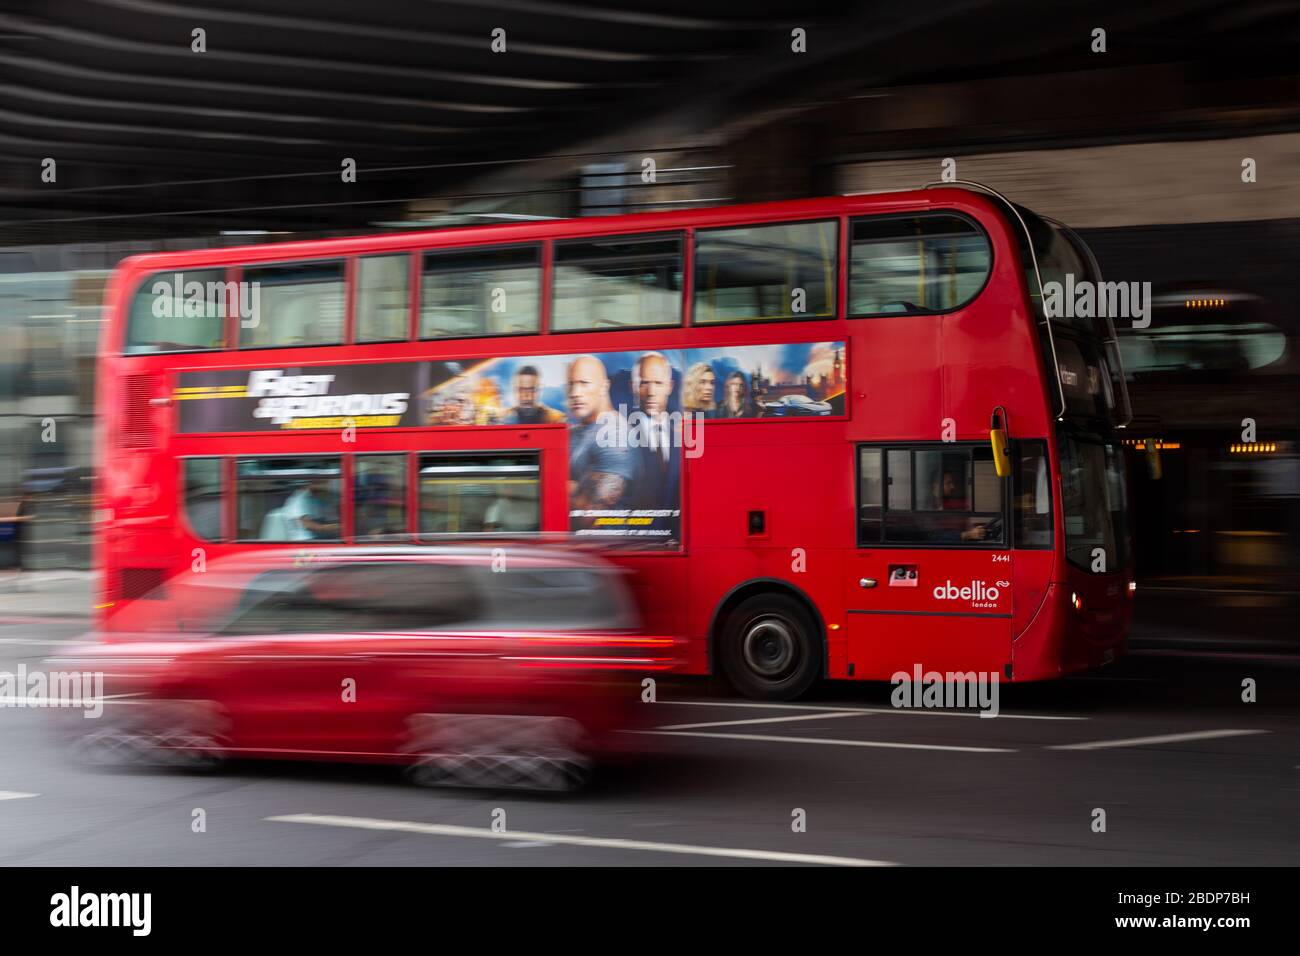 The iconic double decker busses of Greater London are part of an integrated public transit system. Stock Photo